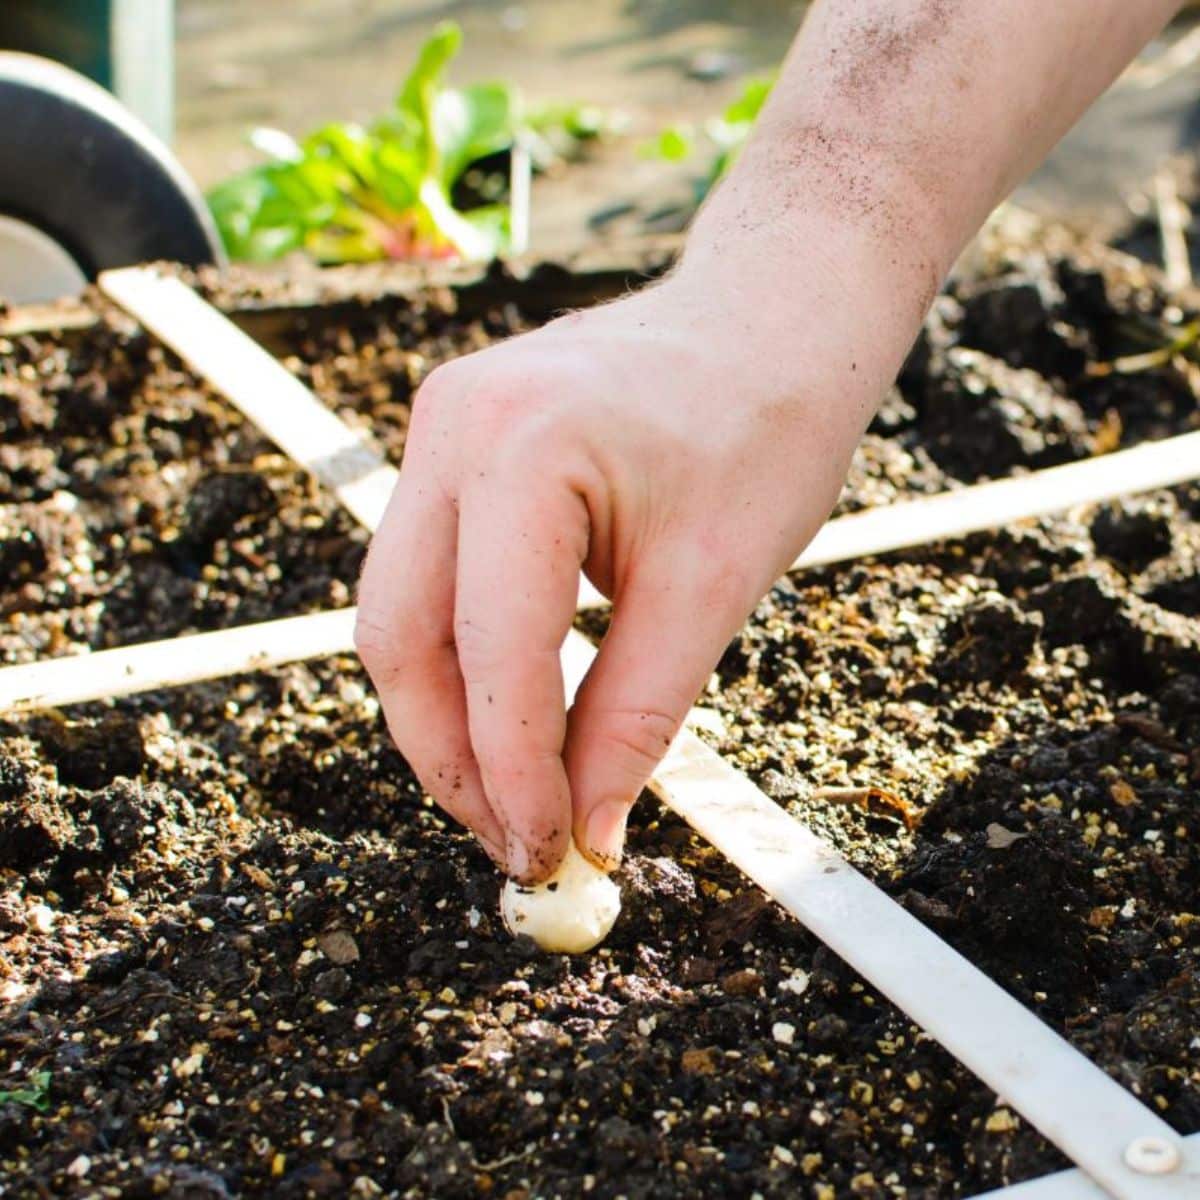 A gardener planting a bulb in a raised garden bed.